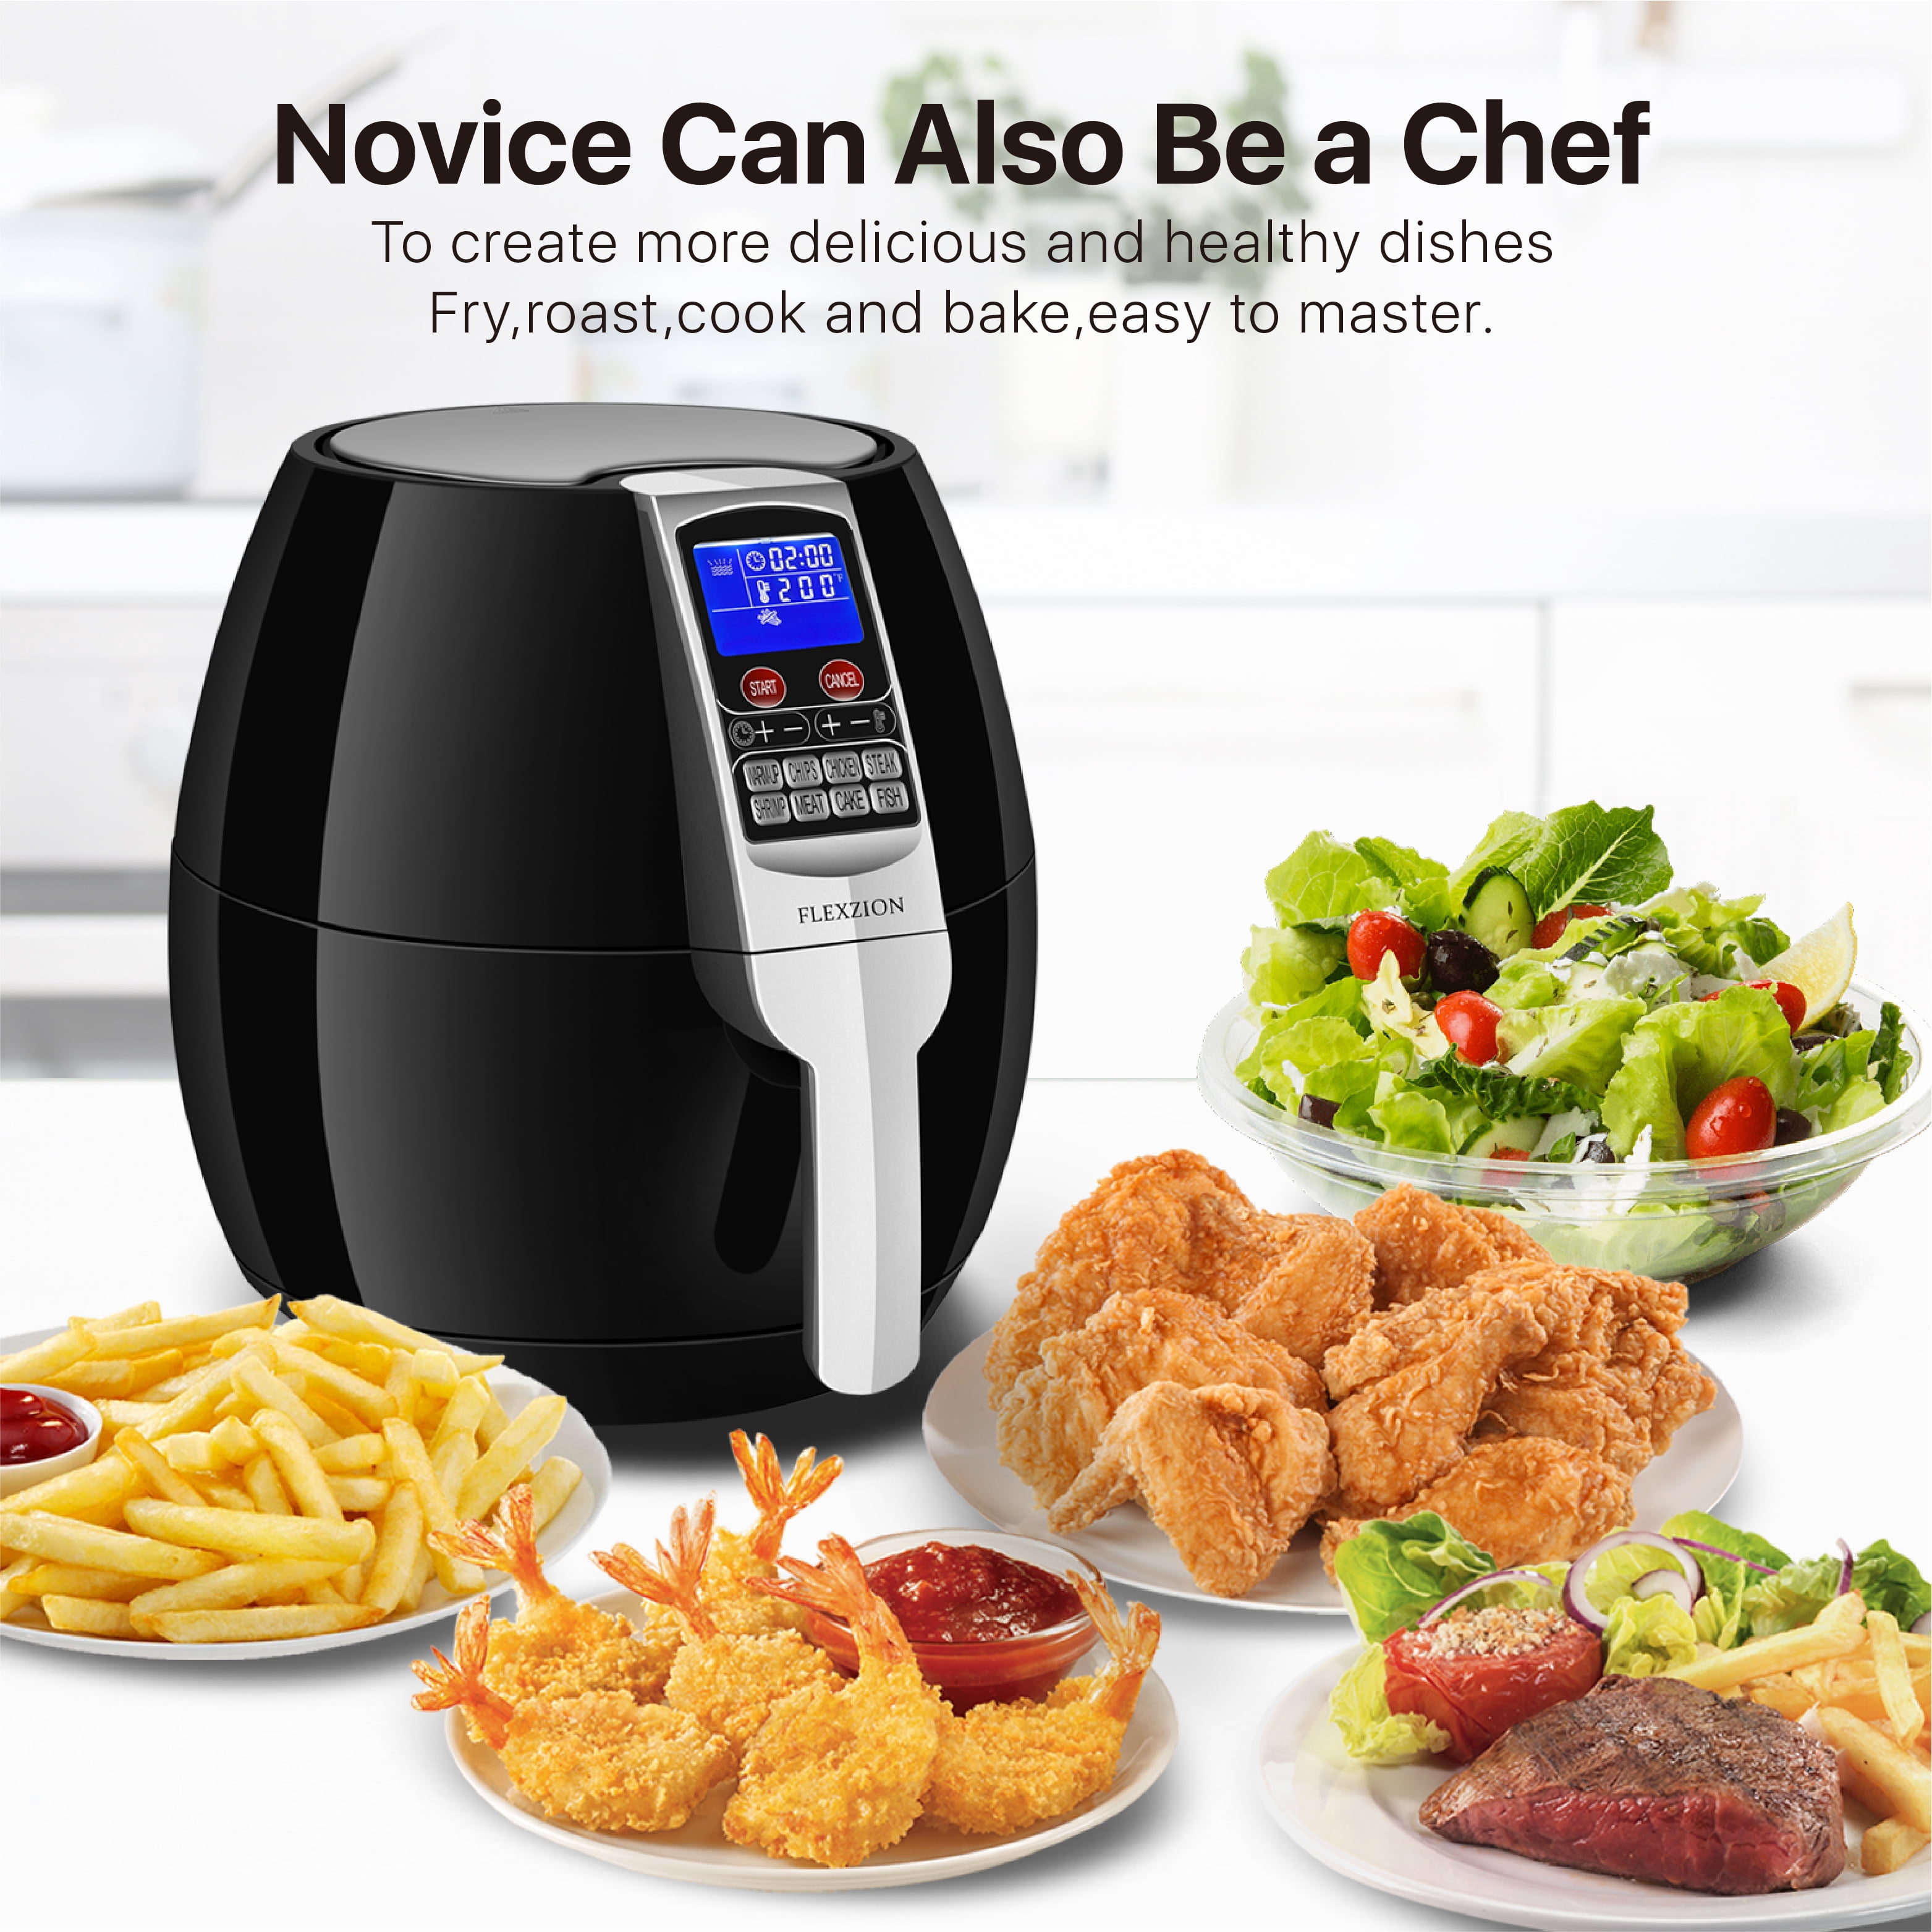 LIUXR Air Fryer, Air Fry, Oven Oilless Cooker, with Temperature Control &  Timer Knob, Nonstick Basket, Auto Shutoff, Healthy Cooking,Pink